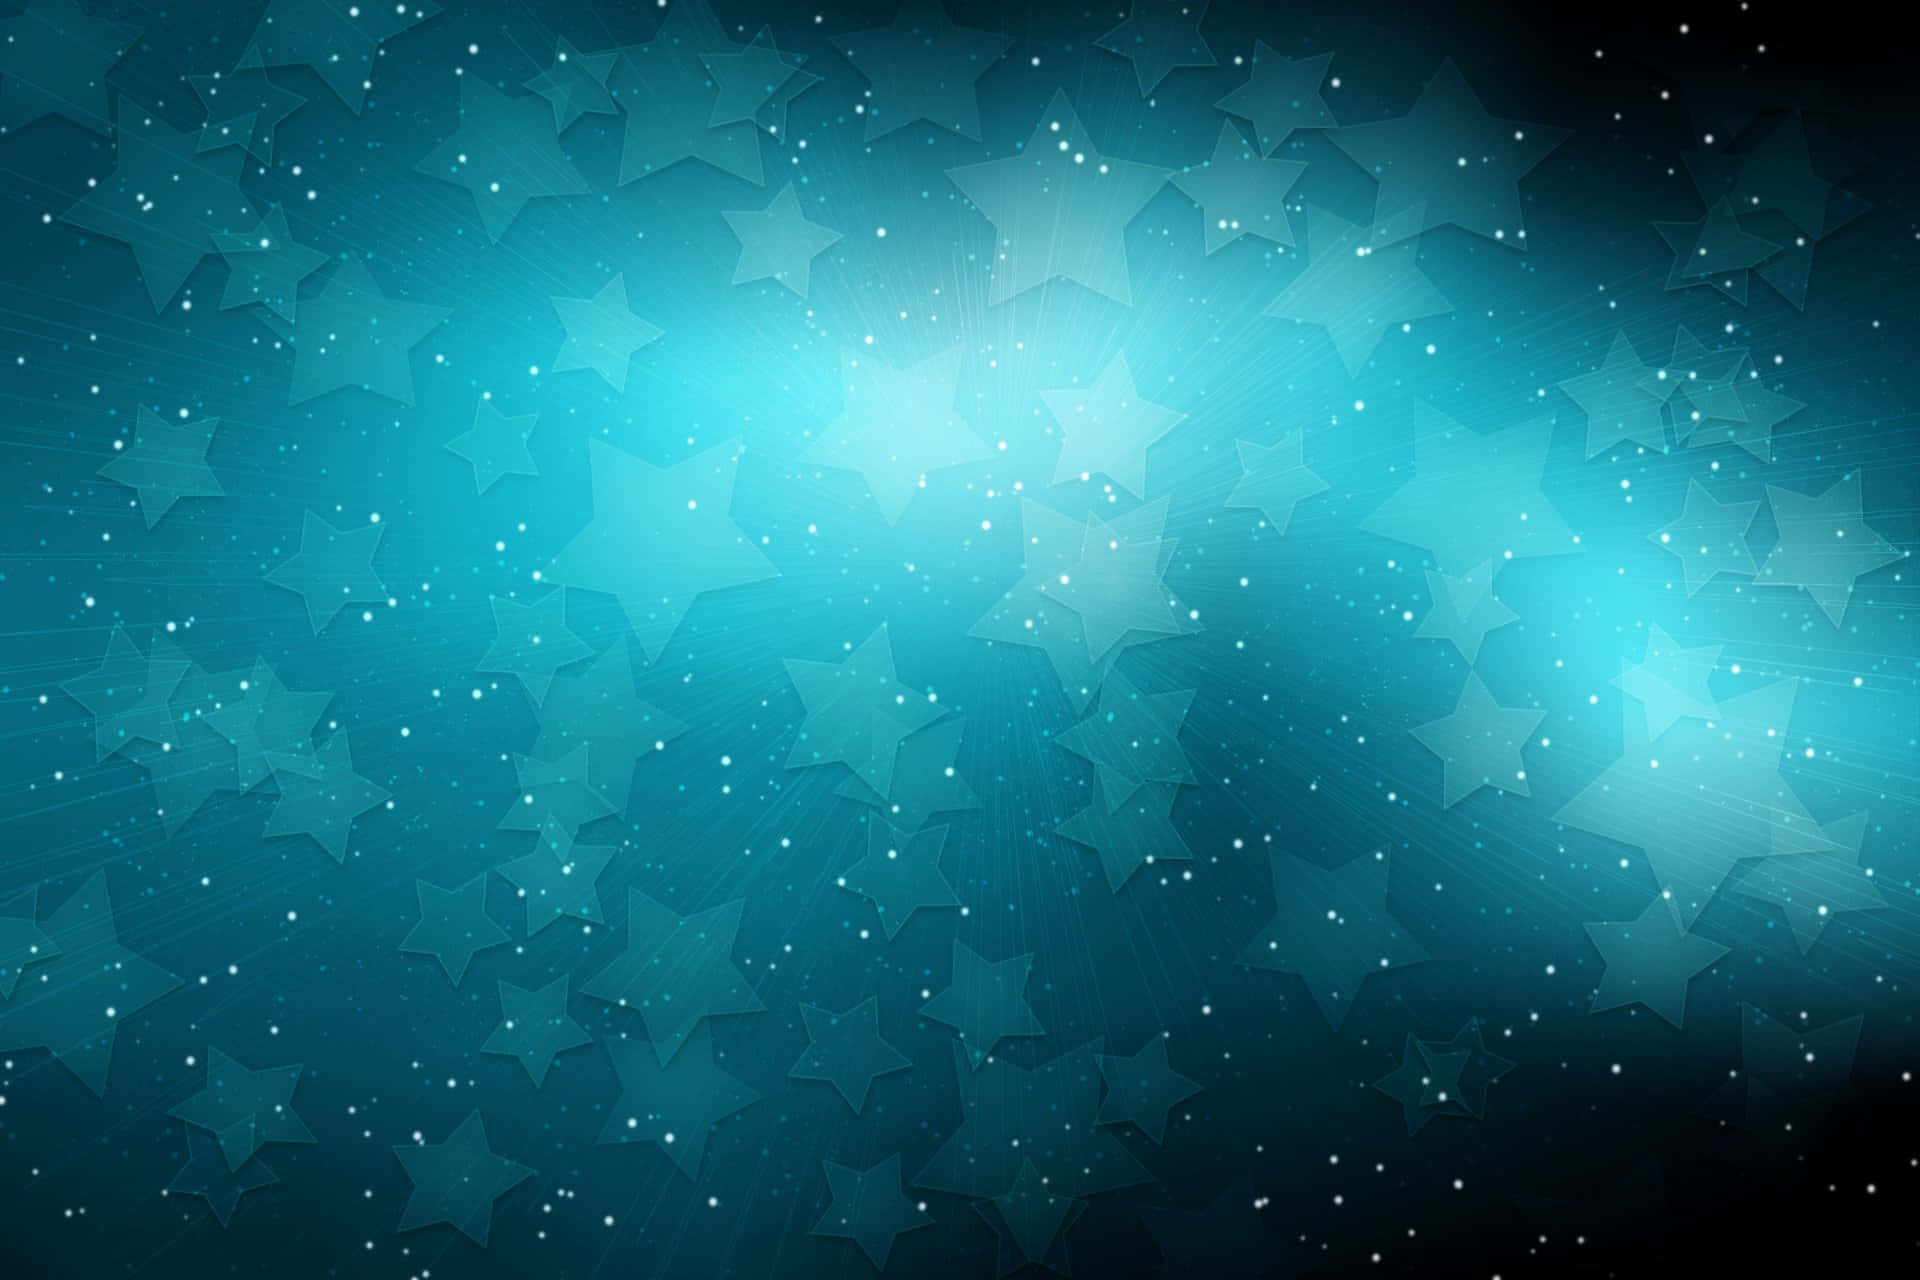 3D Star Illustration in a Glowing Space Background Wallpaper